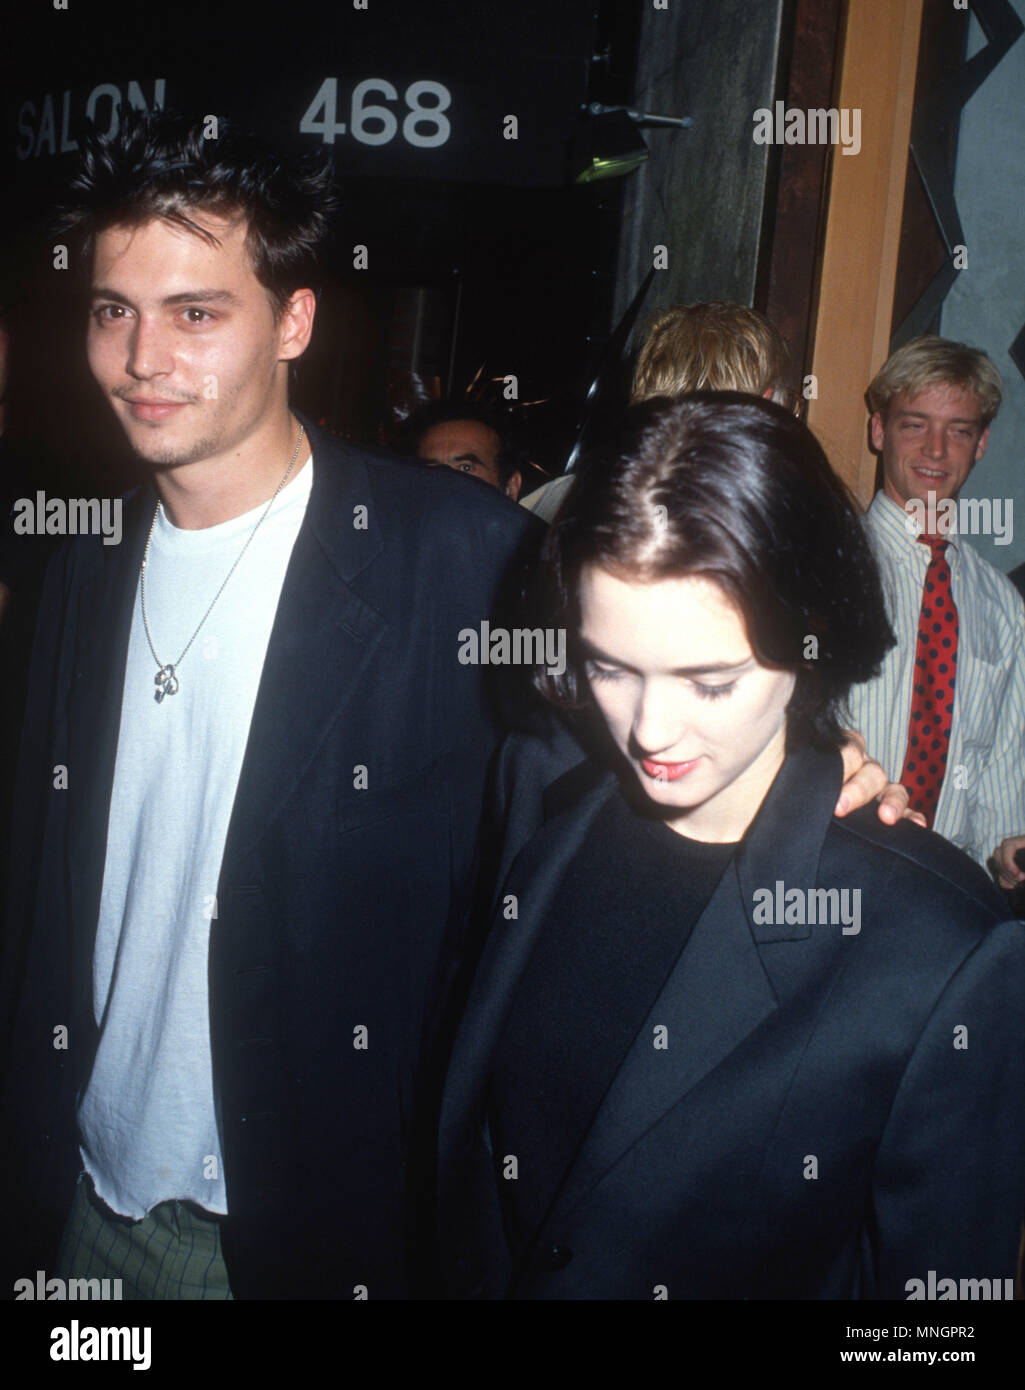 WESTWOOD, CA - SEPTEMBER 24: (L-R) Actor Johnny Depp and actress Winona Ryder attend the 'Pacific Heights' Westwood Premiere on September 24, 1990 at Avco General Cinemas in Westwood, California. Photo by Barry King/Alamy Stock Photo Stock Photo